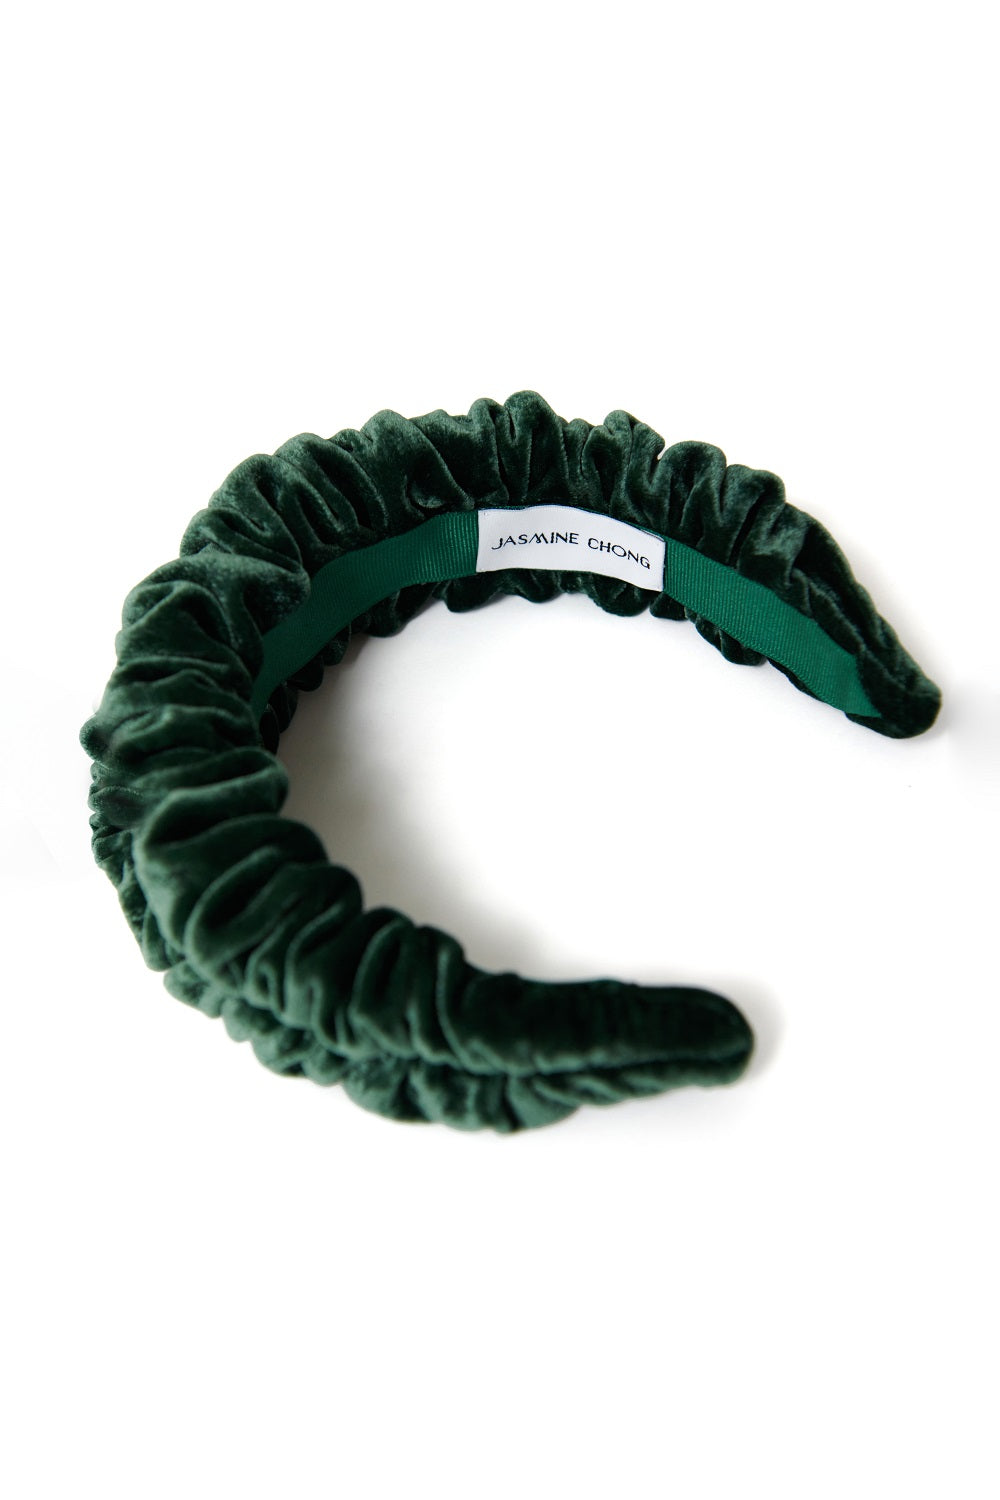 Celosia Gathered Headband (more colors available)